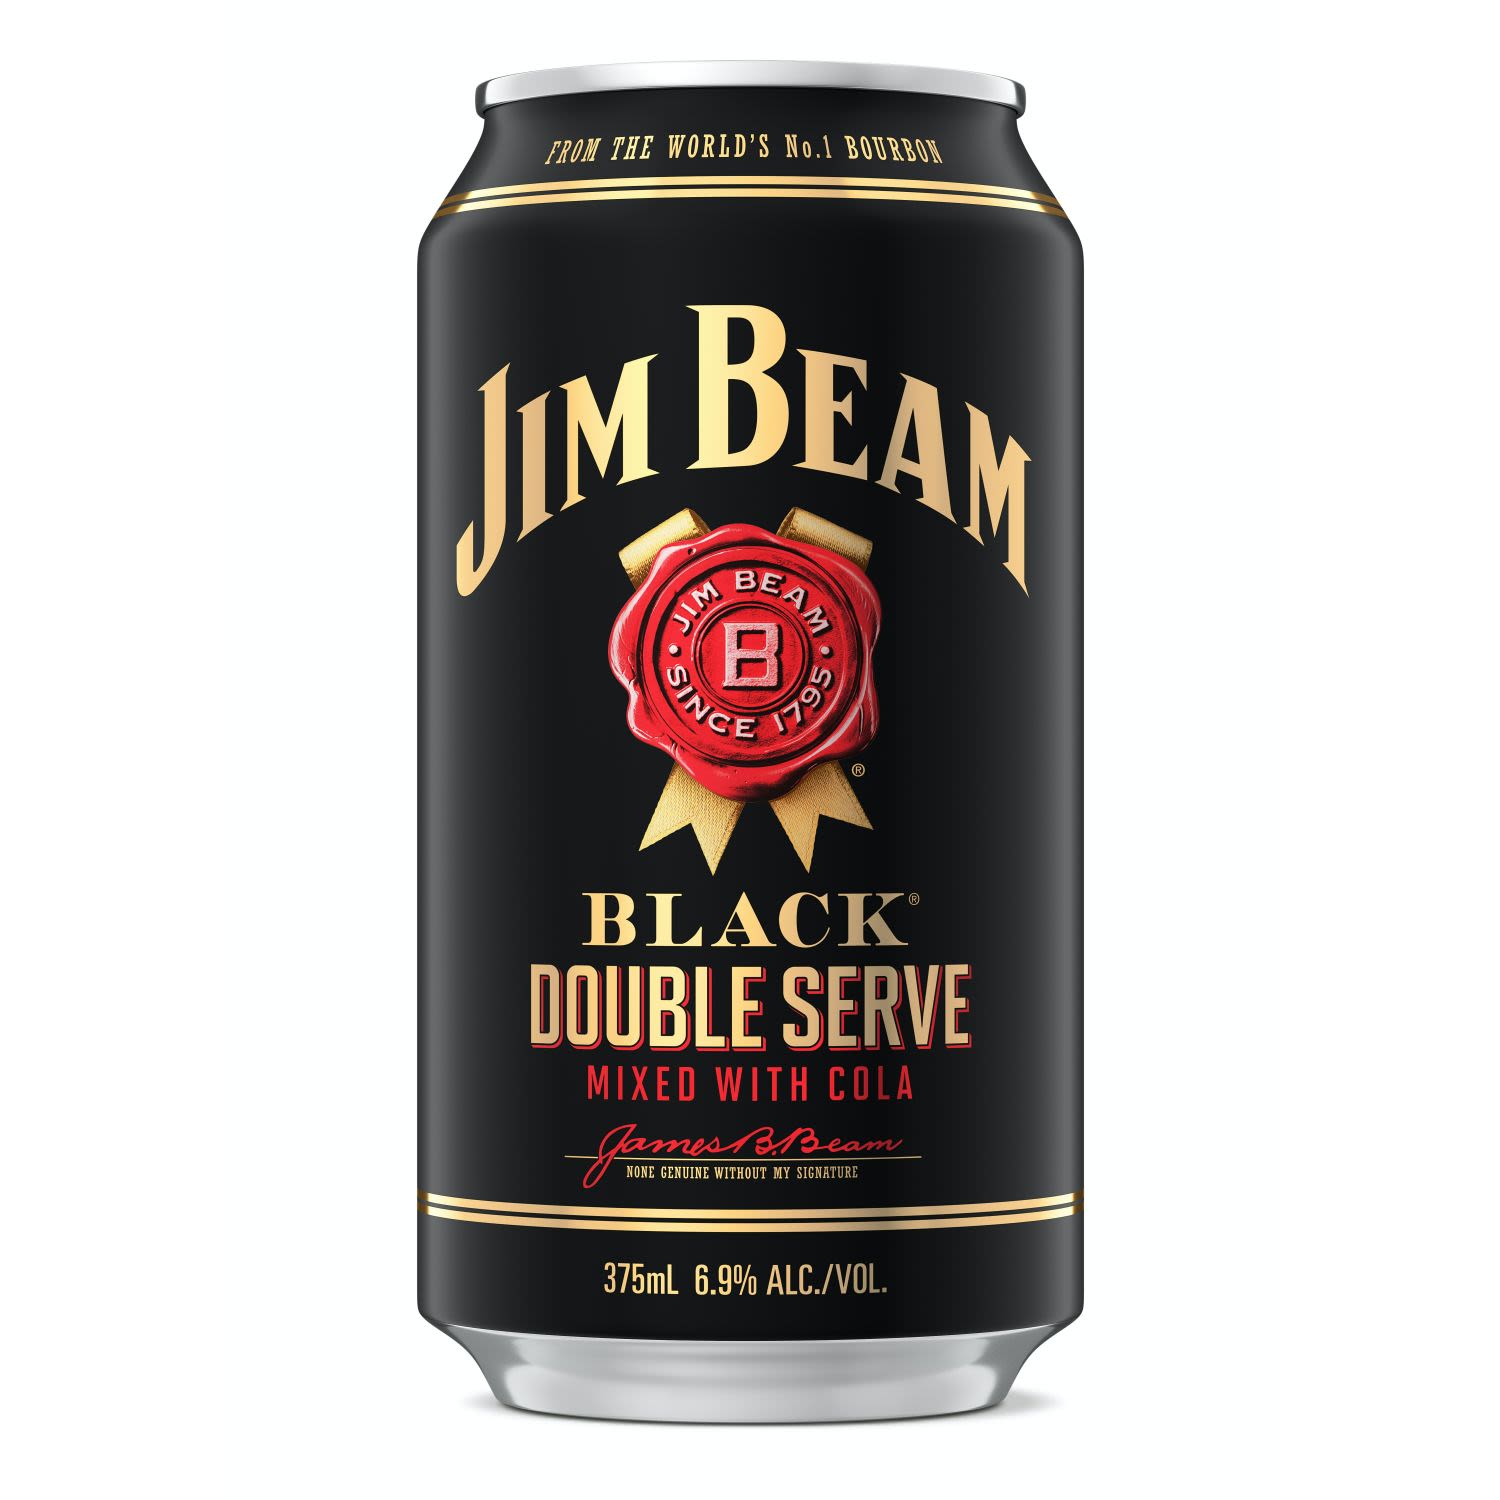 Jim Beam Black Double Serve delivers two servings of the premium, extra-aged Jim Beam Black Bourbon you love, pre-mixed with quality cola.<br /> <br />Alcohol Volume: 6.90%<br /><br />Pack Format: Can<br /><br />Standard Drinks: 2.1</br /><br />Pack Type: Can<br />